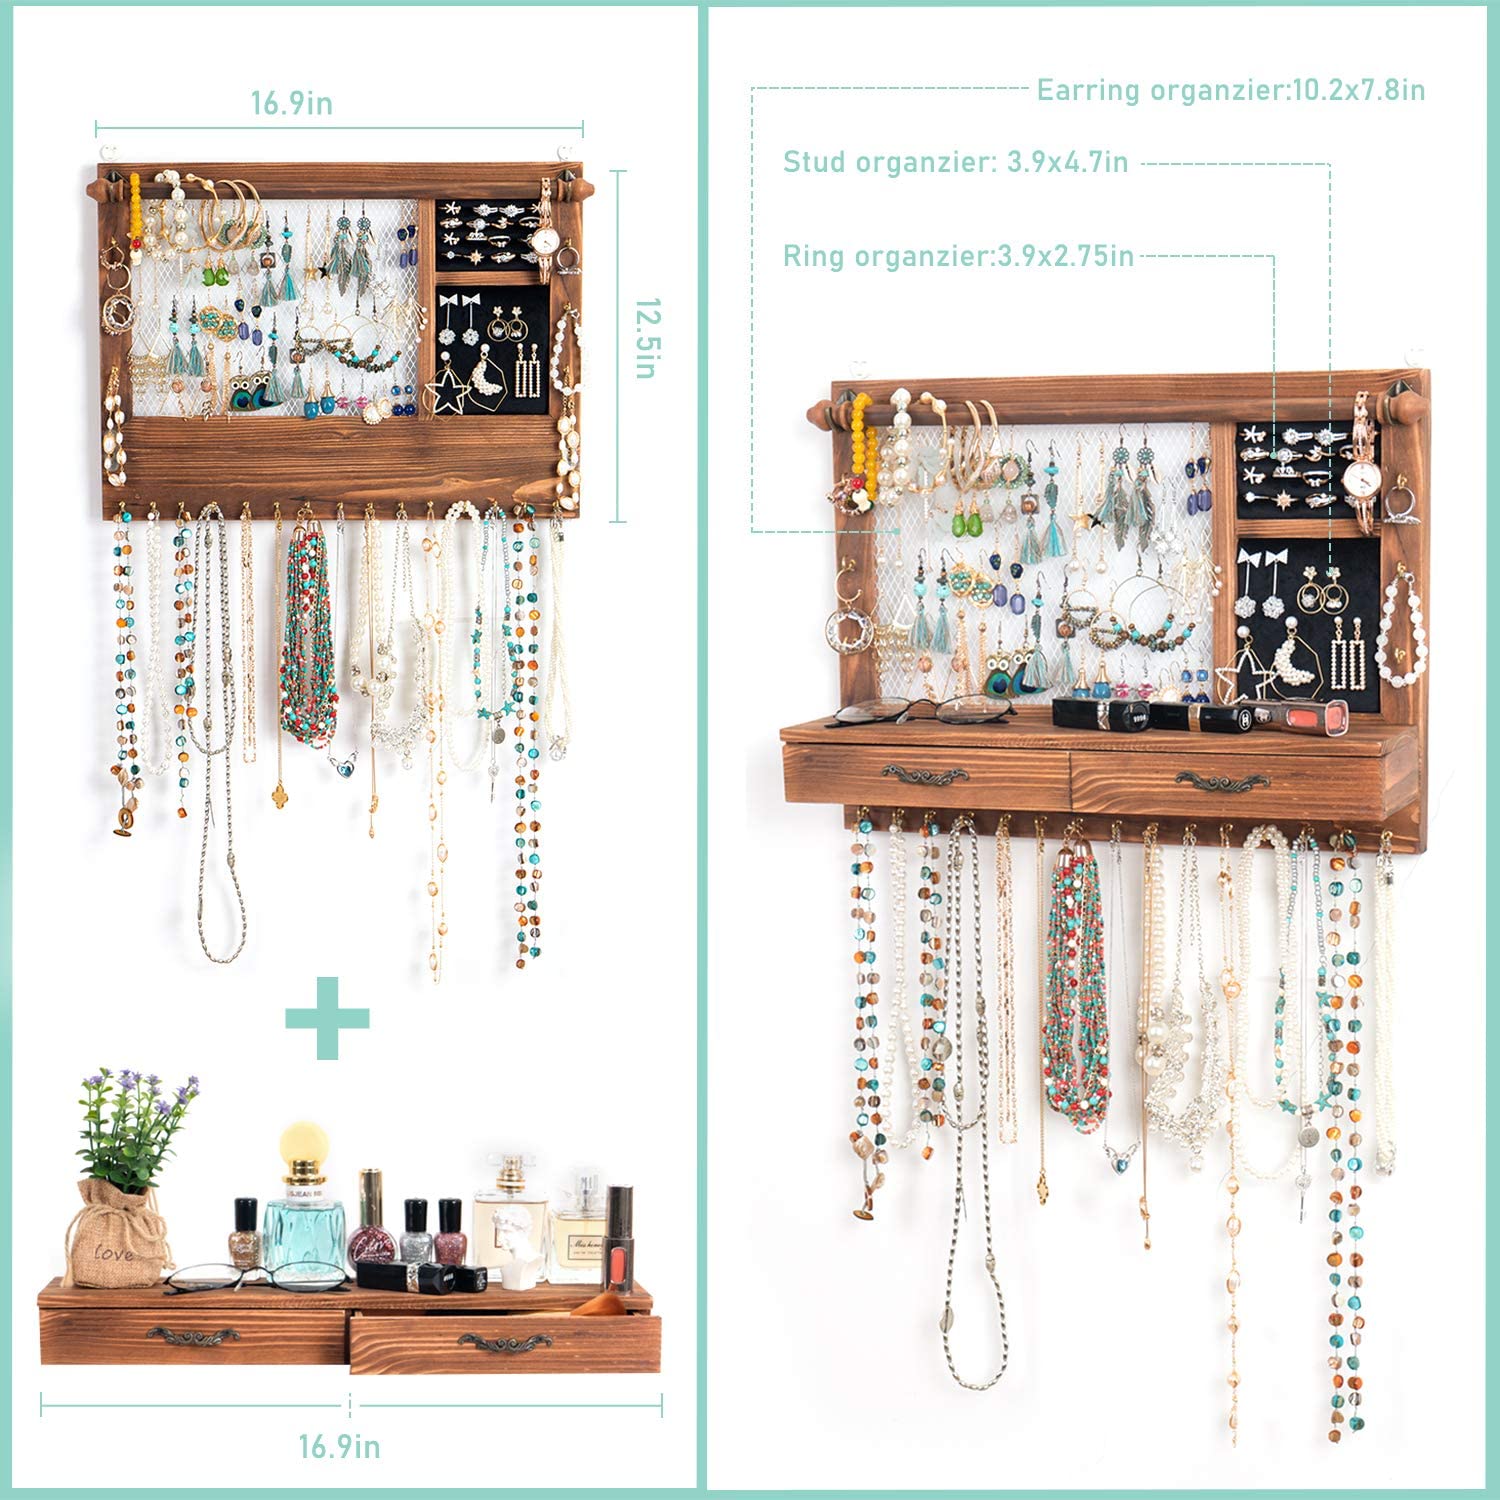 Wall Mounted Jewelry Organizer Jewelry Hanger Display with Drawers